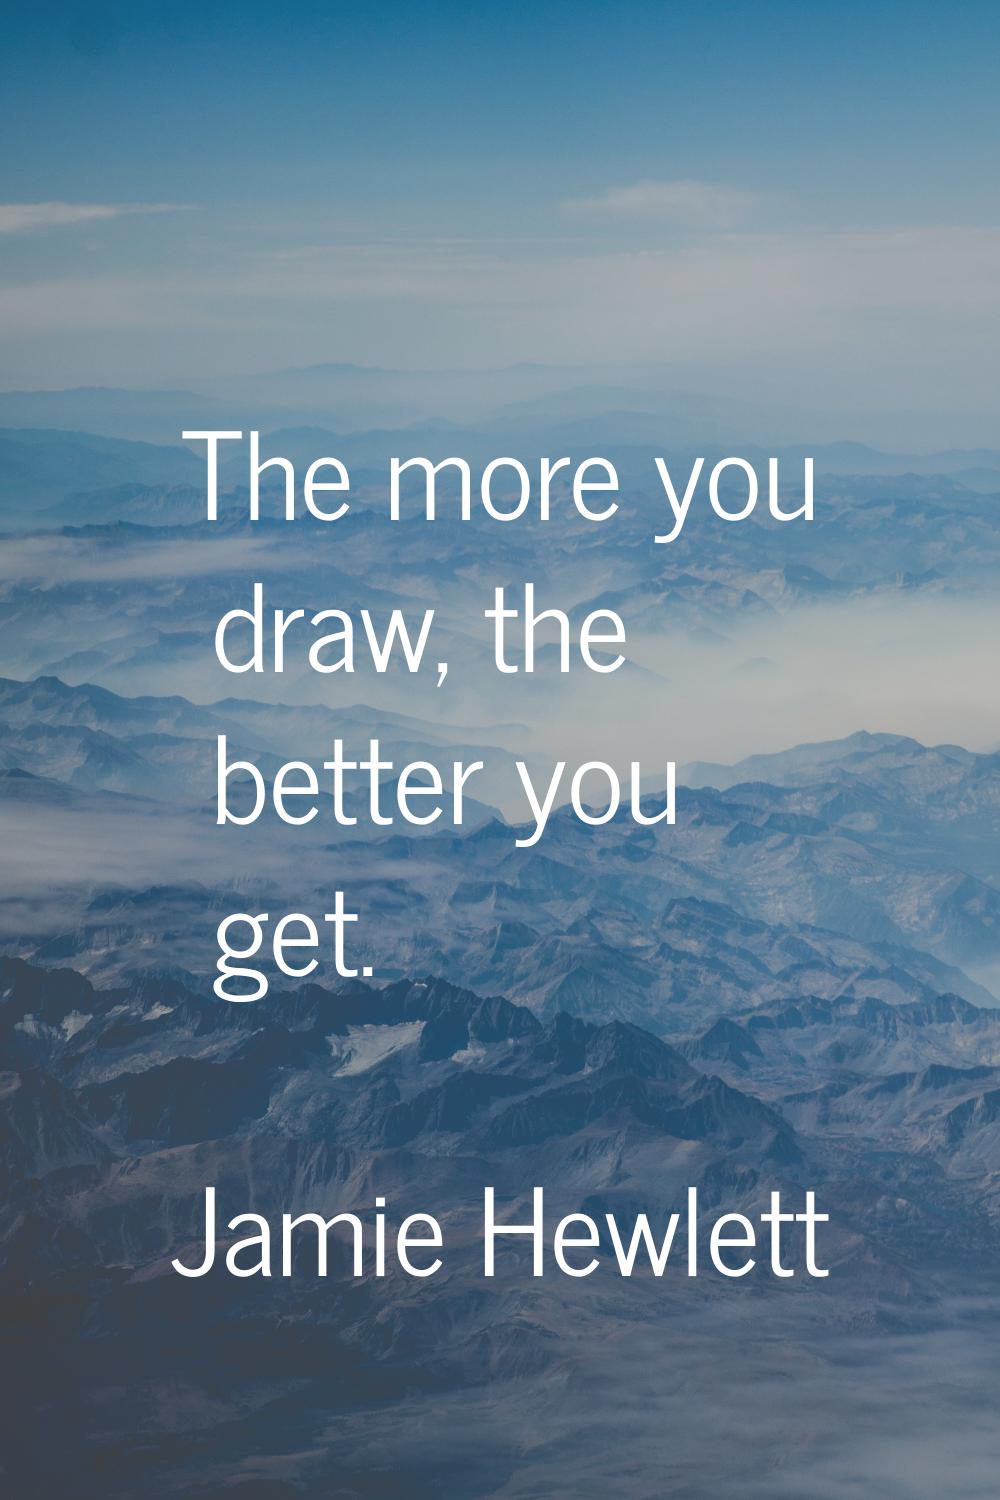 The more you draw, the better you get.